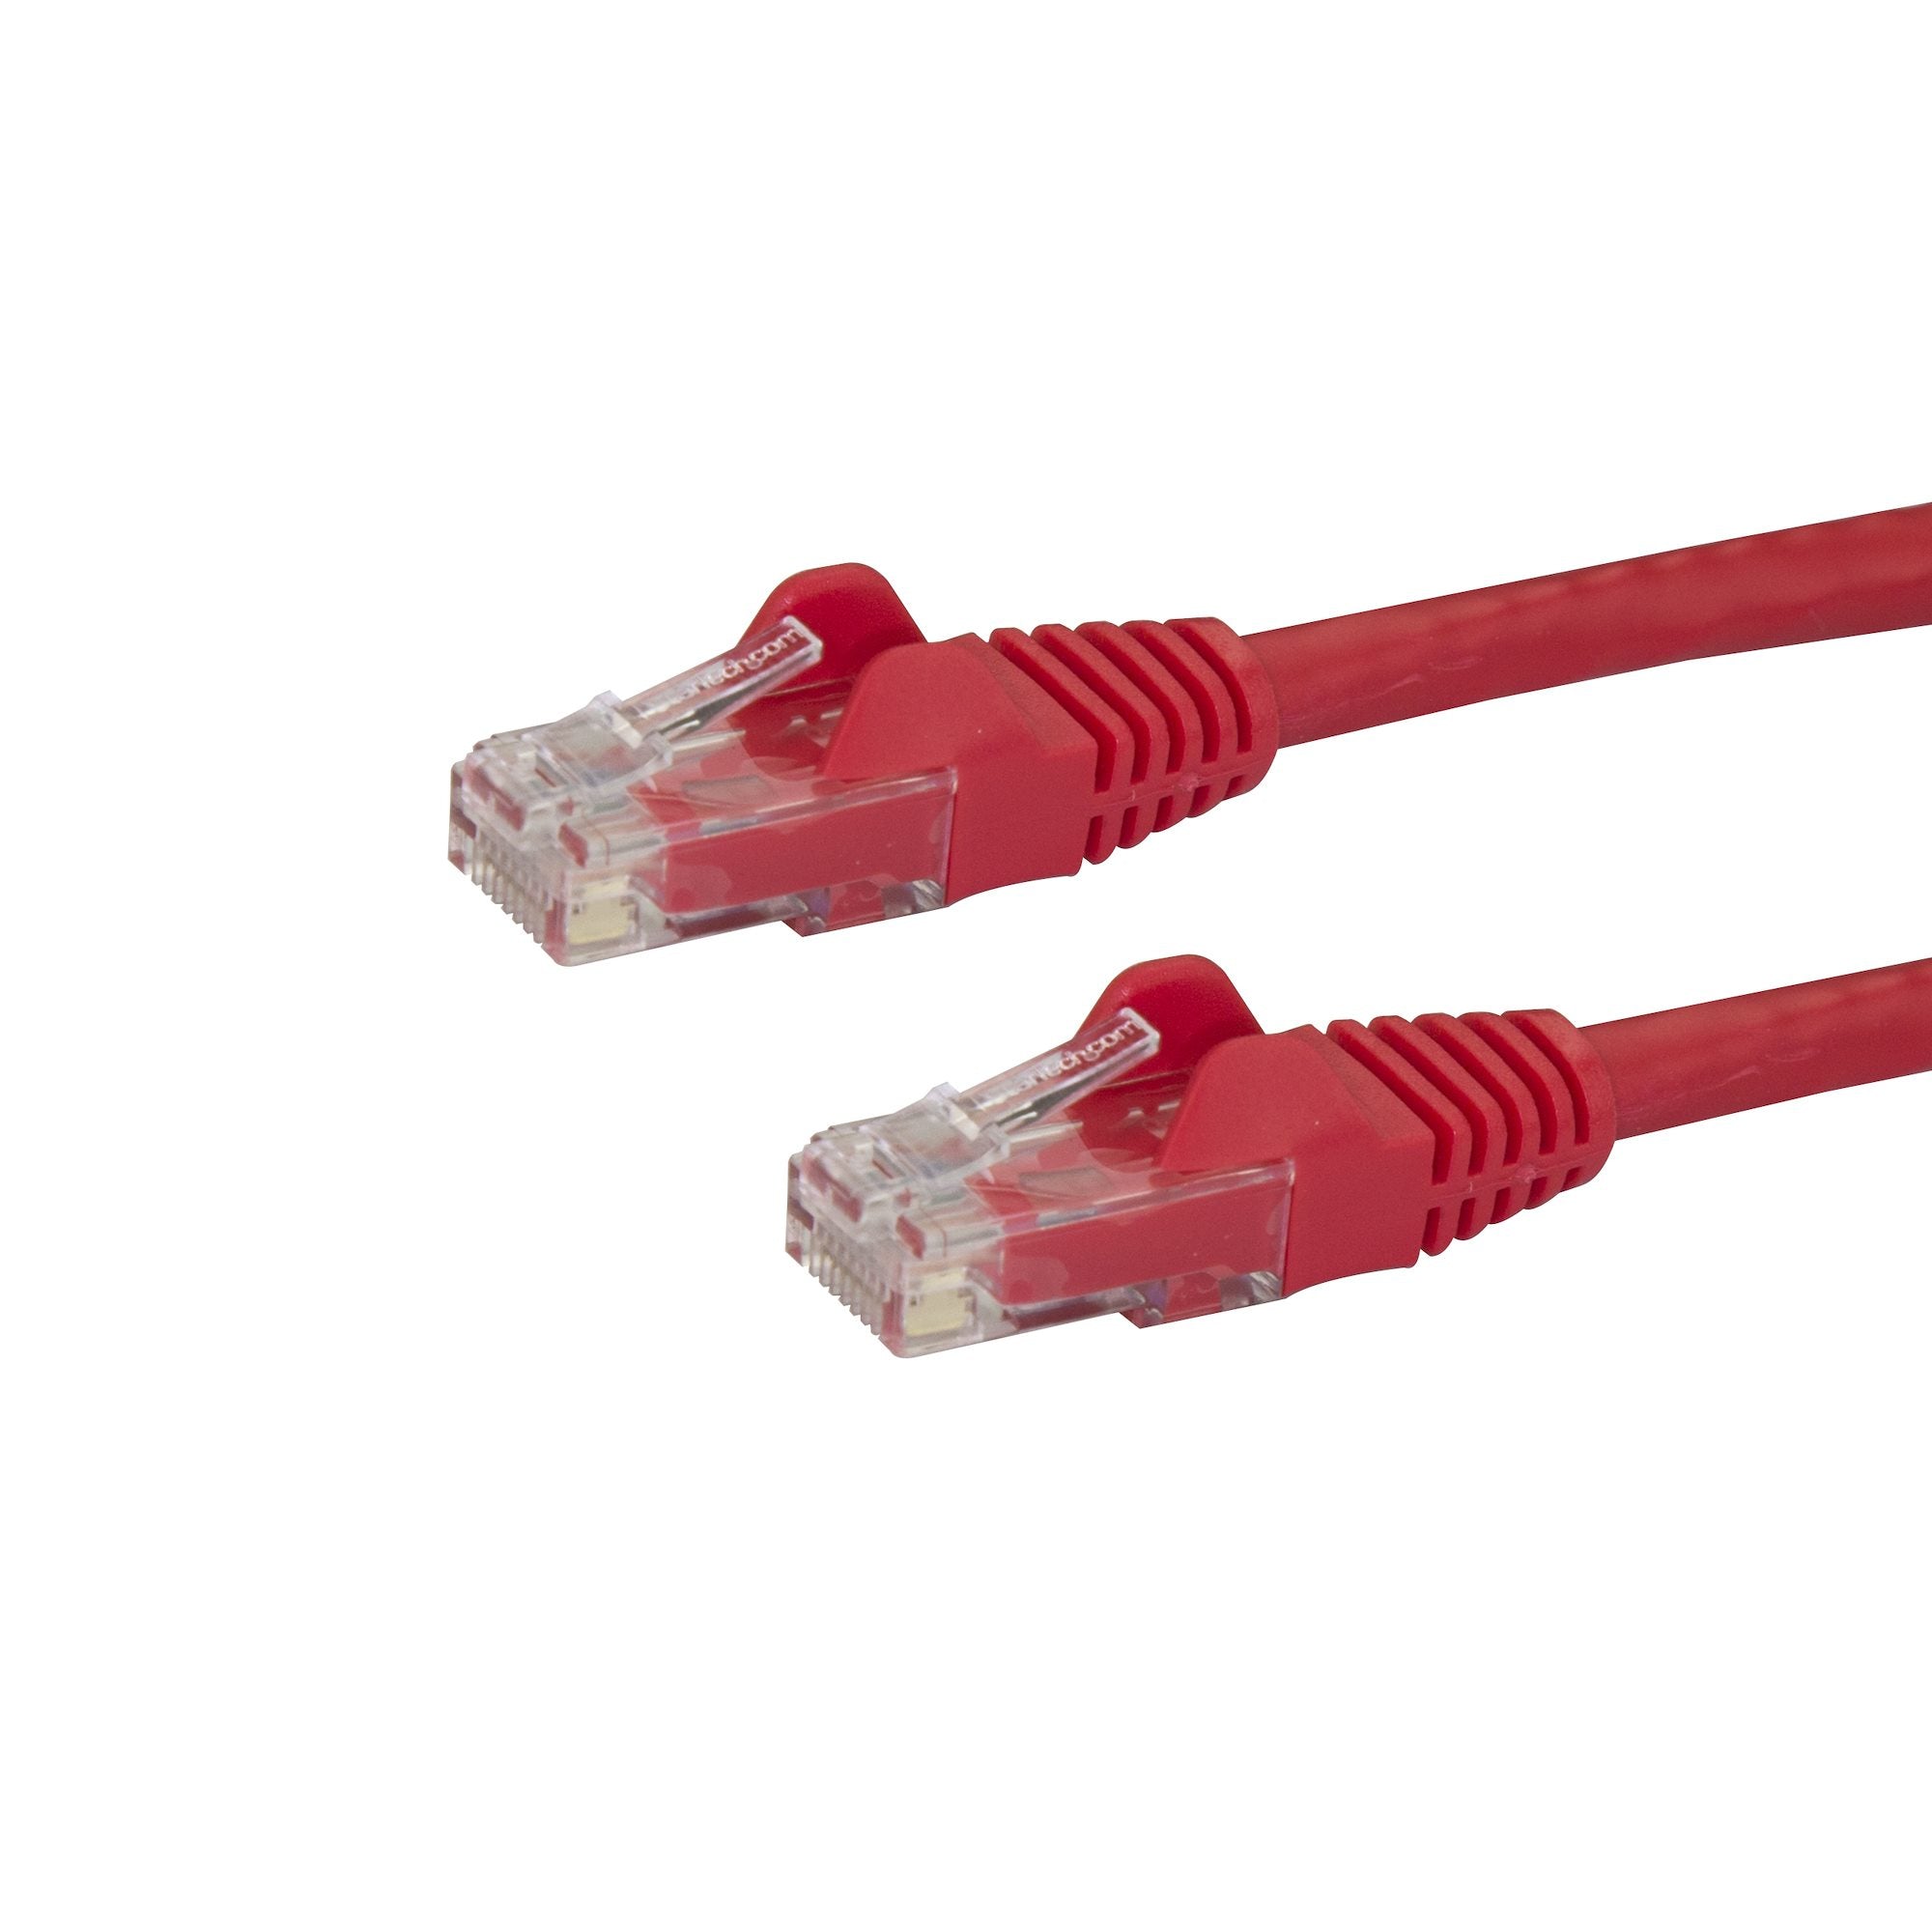 75ft CAT6 Ethernet Cable - Red CAT 6 Gigabit Ethernet Wire -650MHz 100W PoE RJ45 UTP Network/Patch Cord Snagless w/Strain Relief Fluke Tested/Wiring is UL Certified/TIA